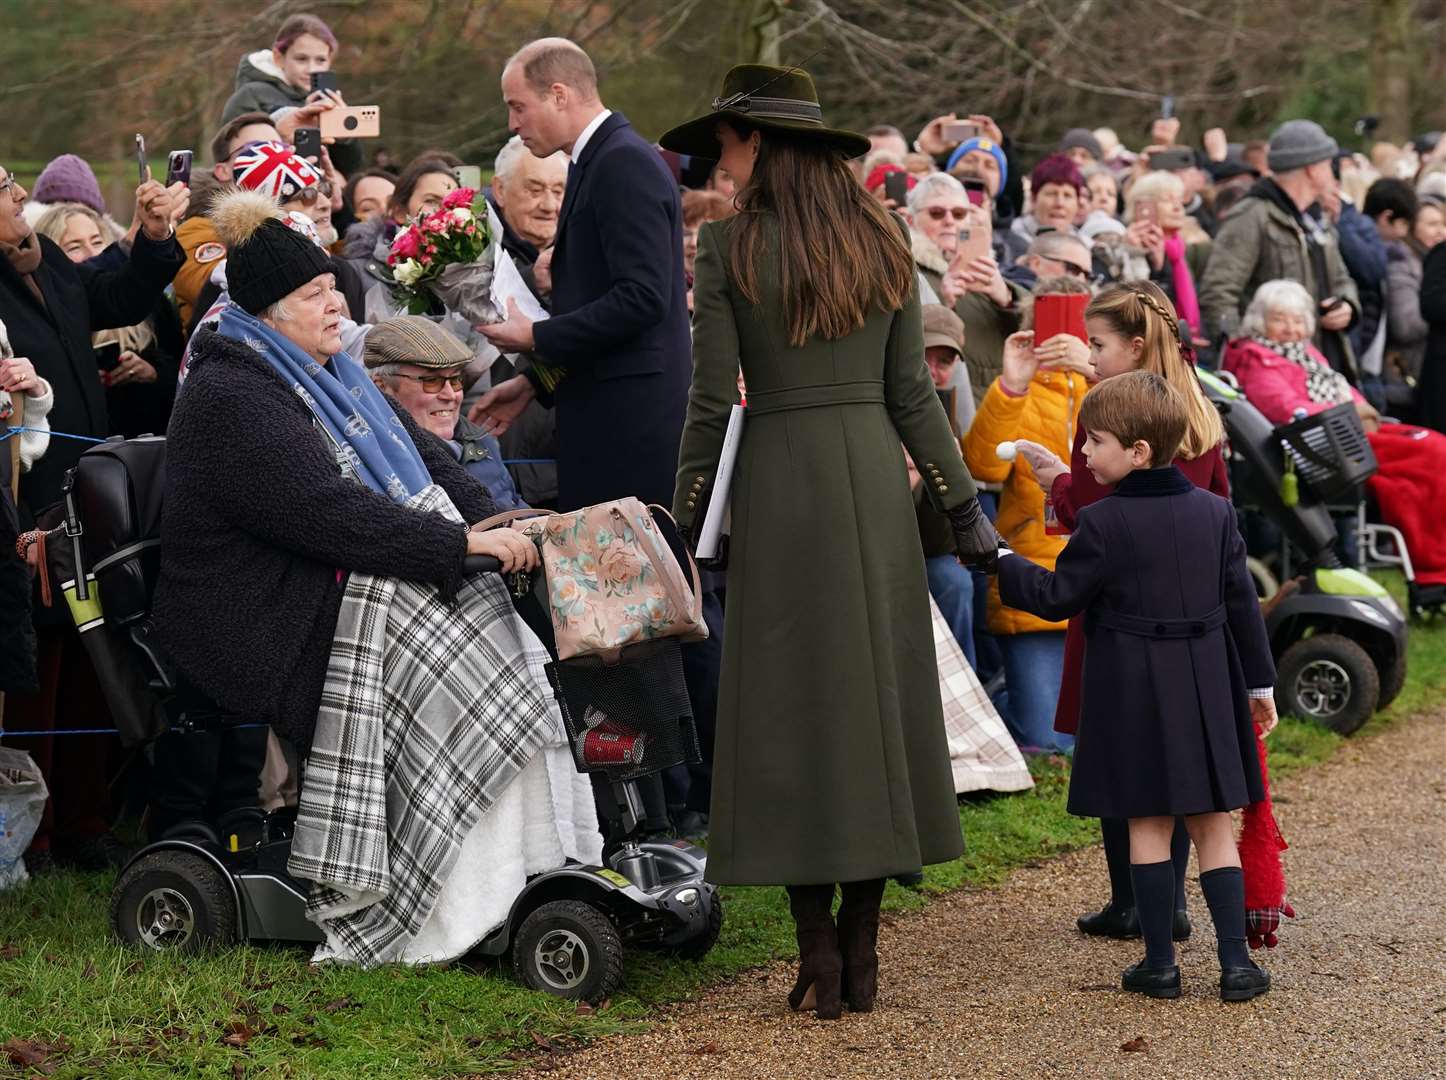 Members of the royal family meet people who travelled to Sandringham to see them (Joe Giddens/PA)